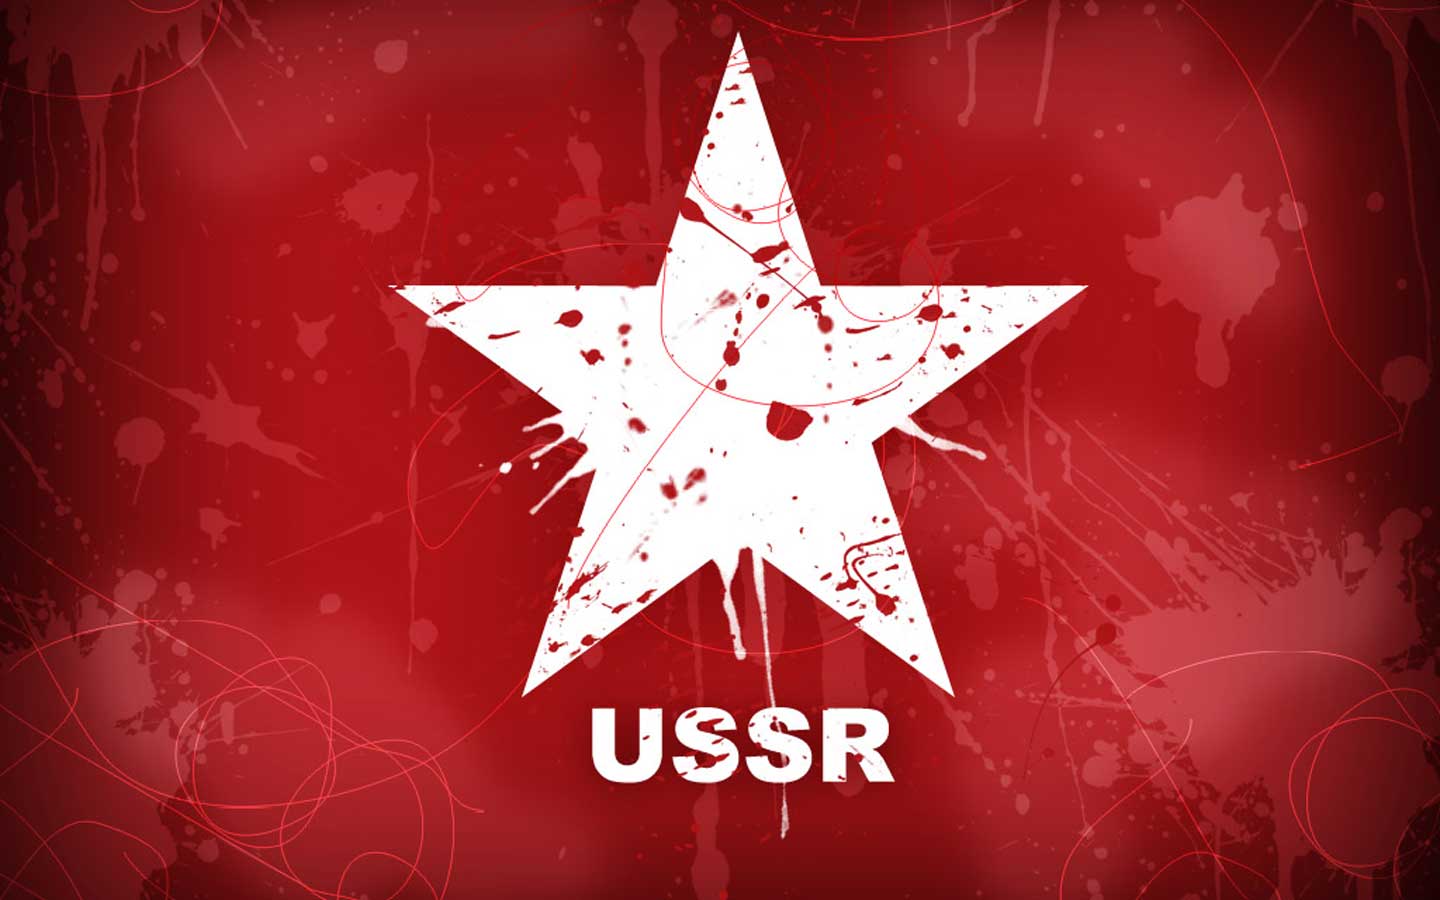 urss wallpaper,red,text,graphic design,font,graphics